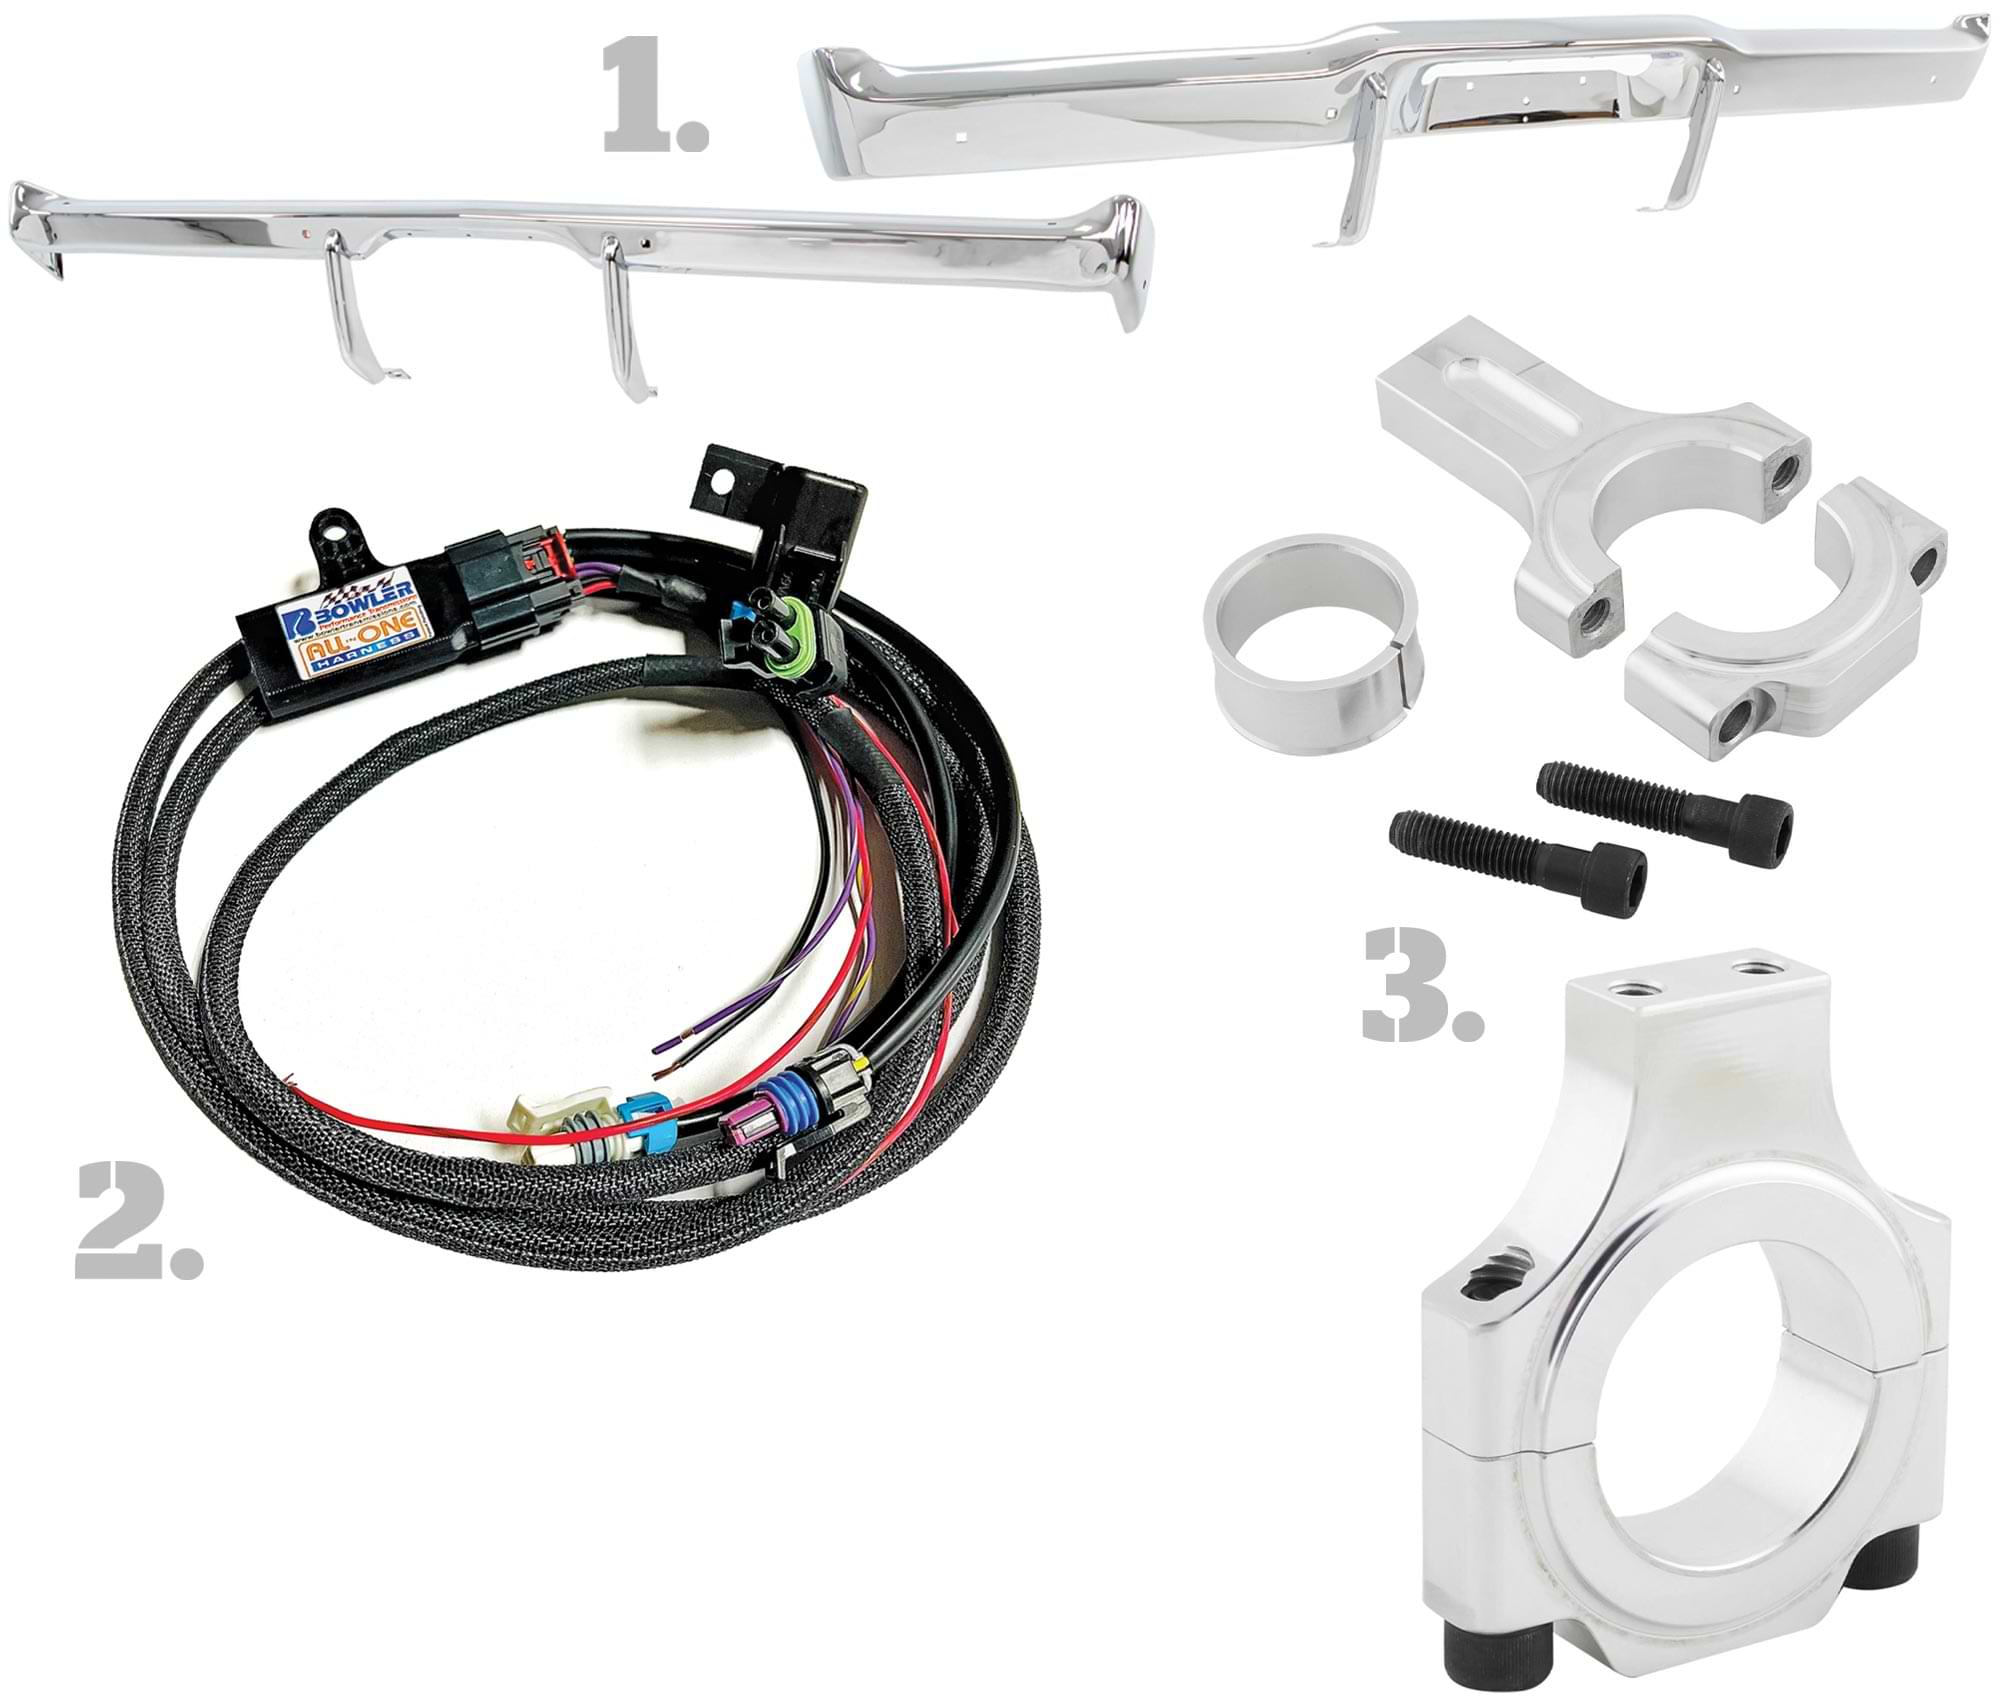 AMD's front and rear bumper; Bowler Performance Transmissions' all in one transmission harness; Speedway Motors Connecting Rod Steering Column Drop, long 4 inches and short 2-1/2 inches (PN 9161966 and PN 9161967)